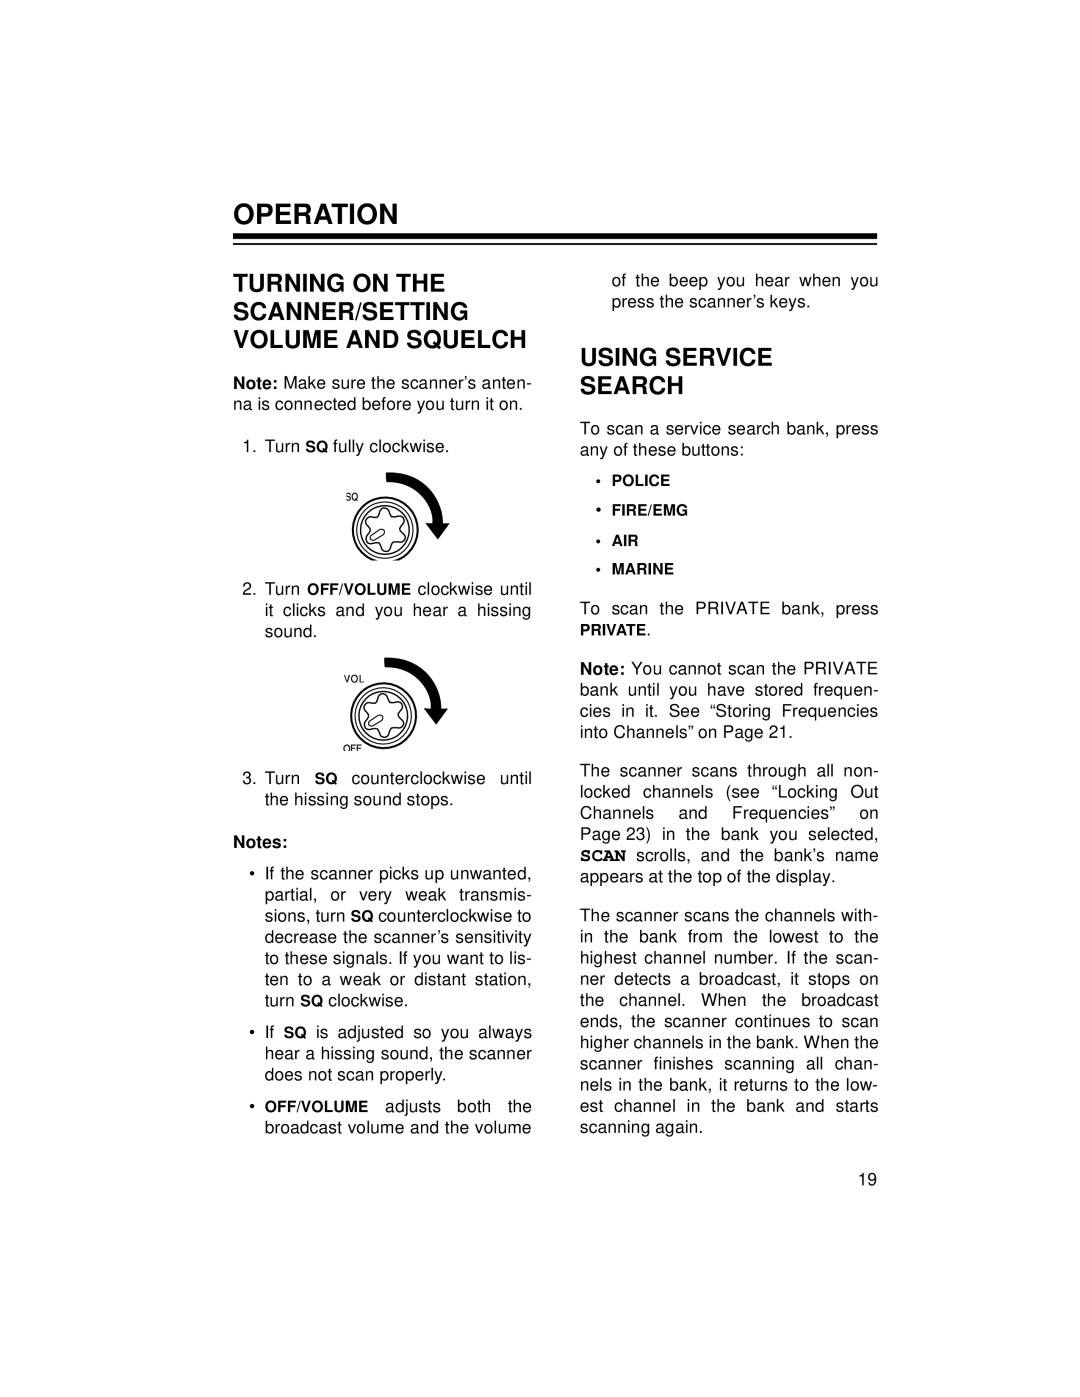 Radio Shack PRO-2056 owner manual Operation, Turning On The Scanner/Setting Volume And Squelch, Using Service Search 